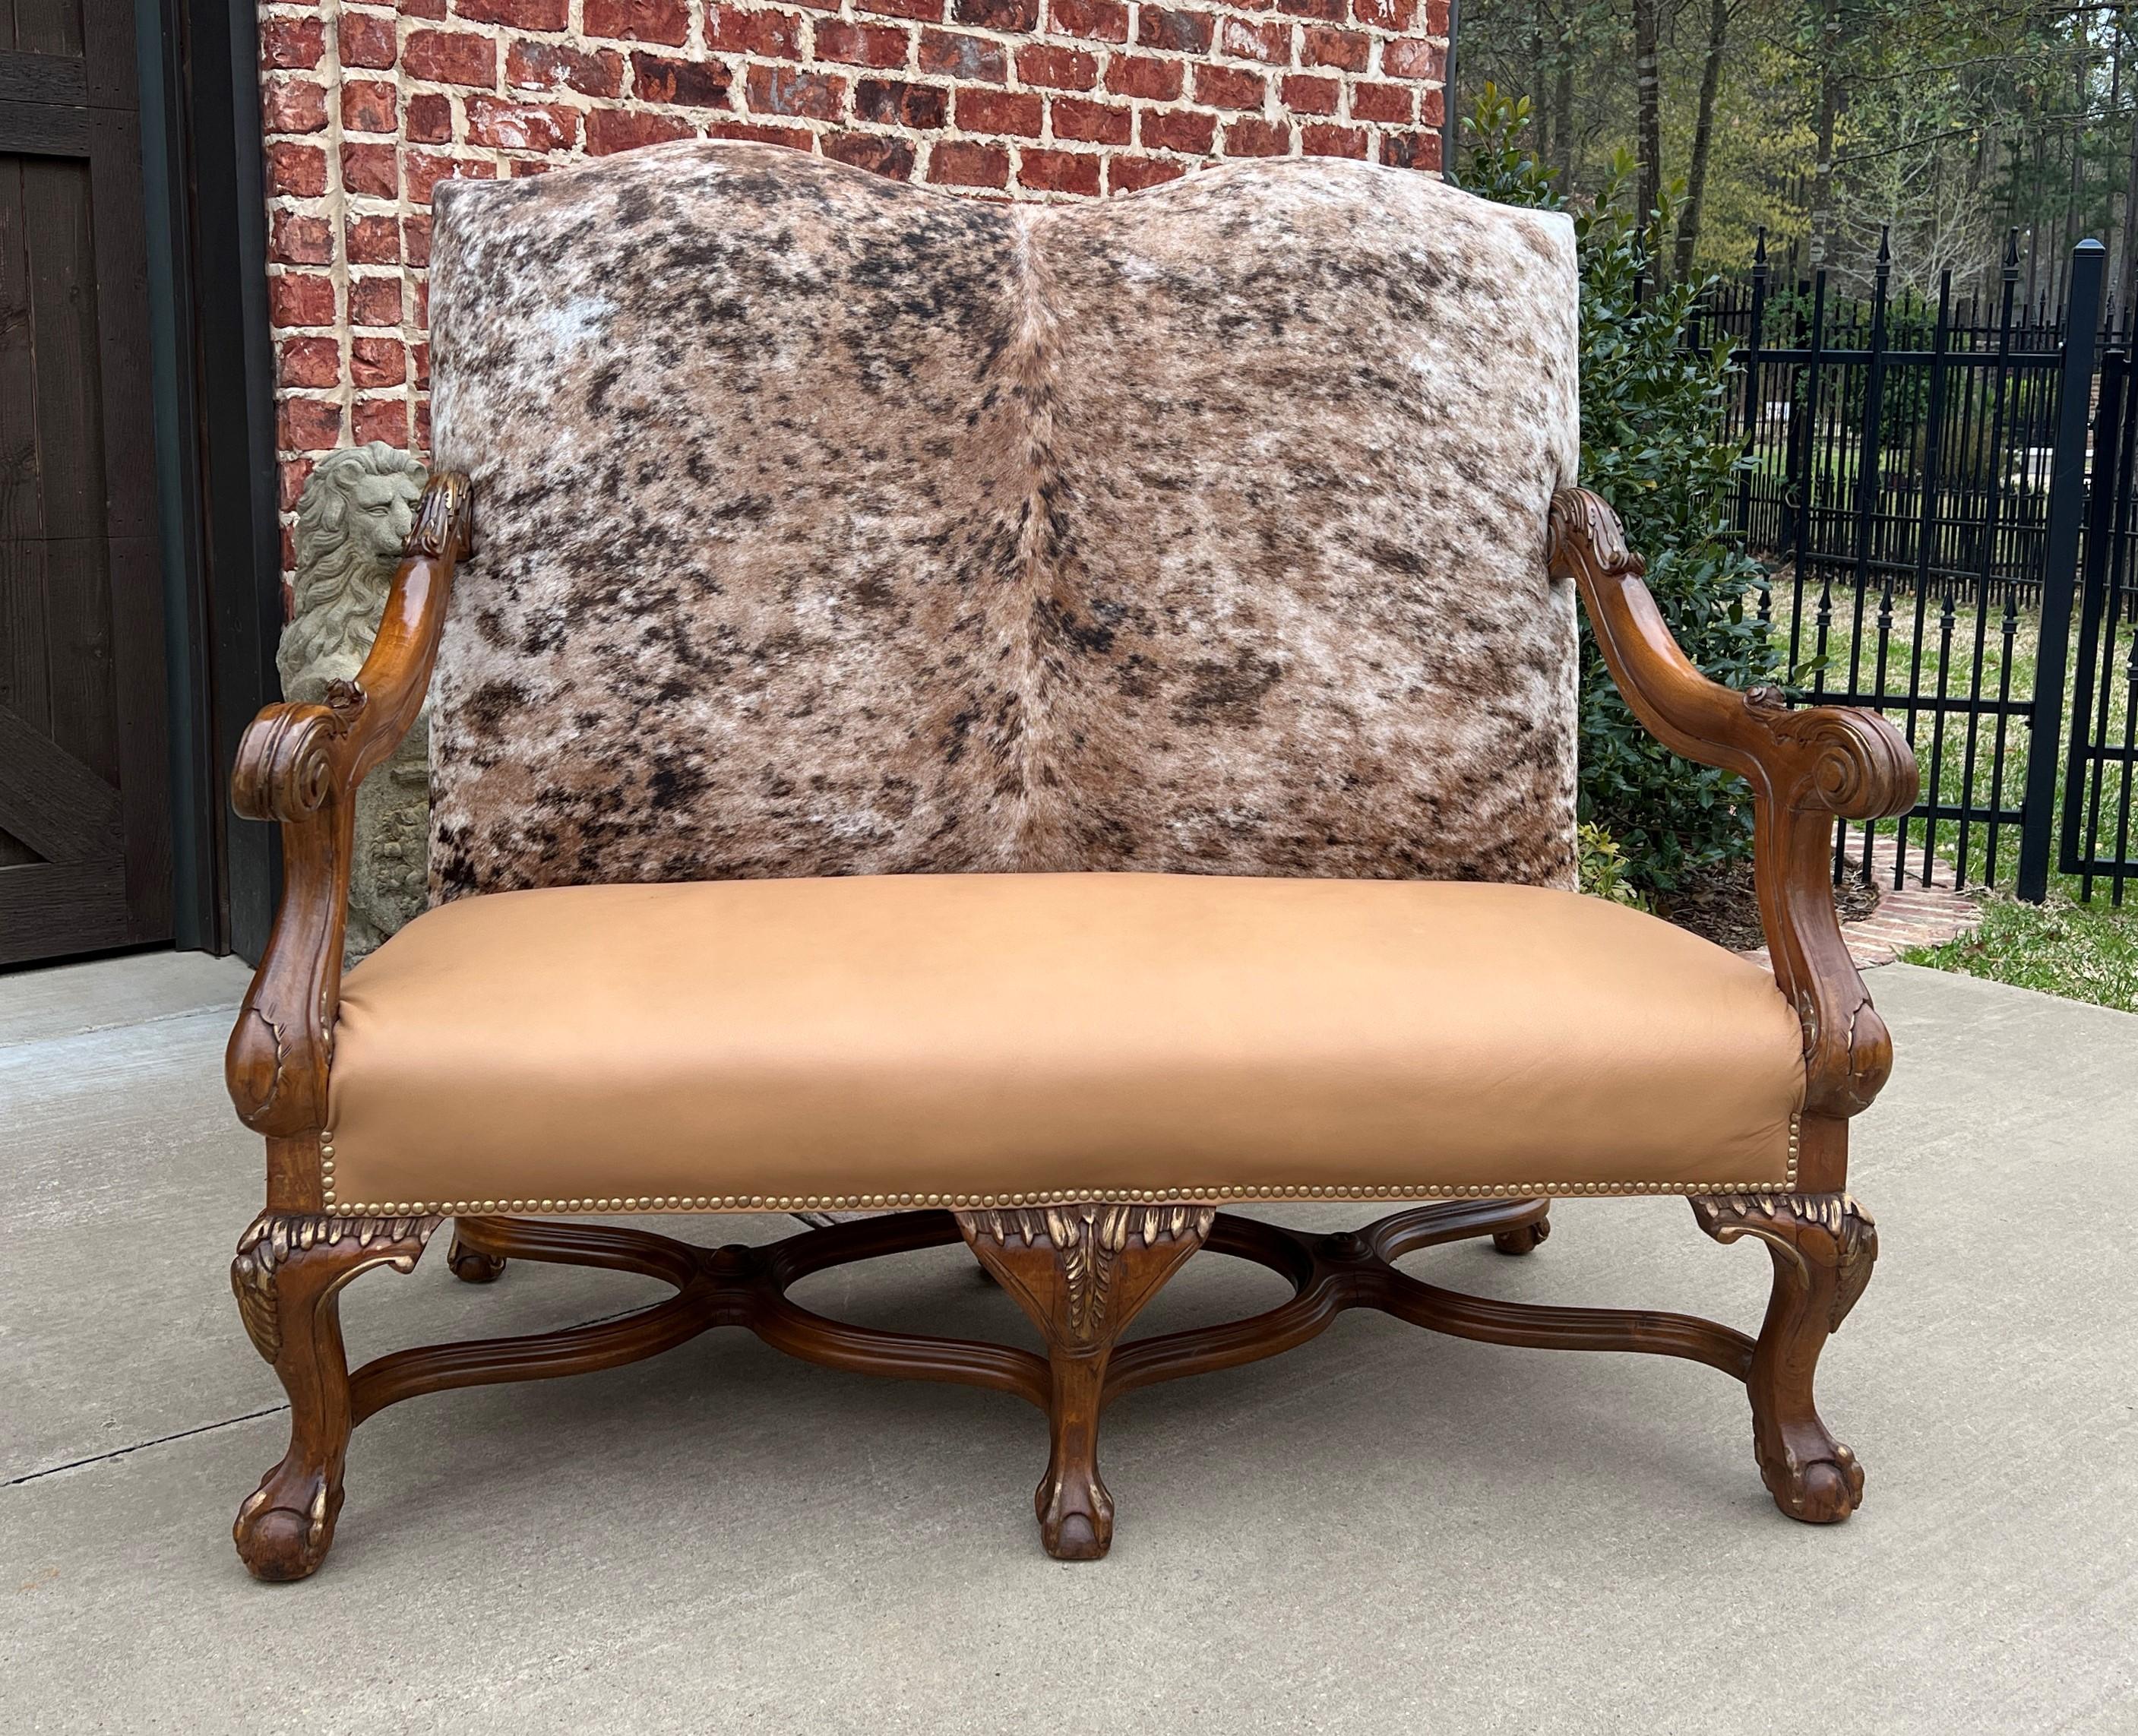 Charming Antique carved walnut frame paired with Vintage cowhide hall bench, settee, sofa, or loveseat~~

Perfect rustic, ranch, or western look for a farmhouse, hunting or mountain cabinet, ski lodge, office, study, or library~~the possibilities